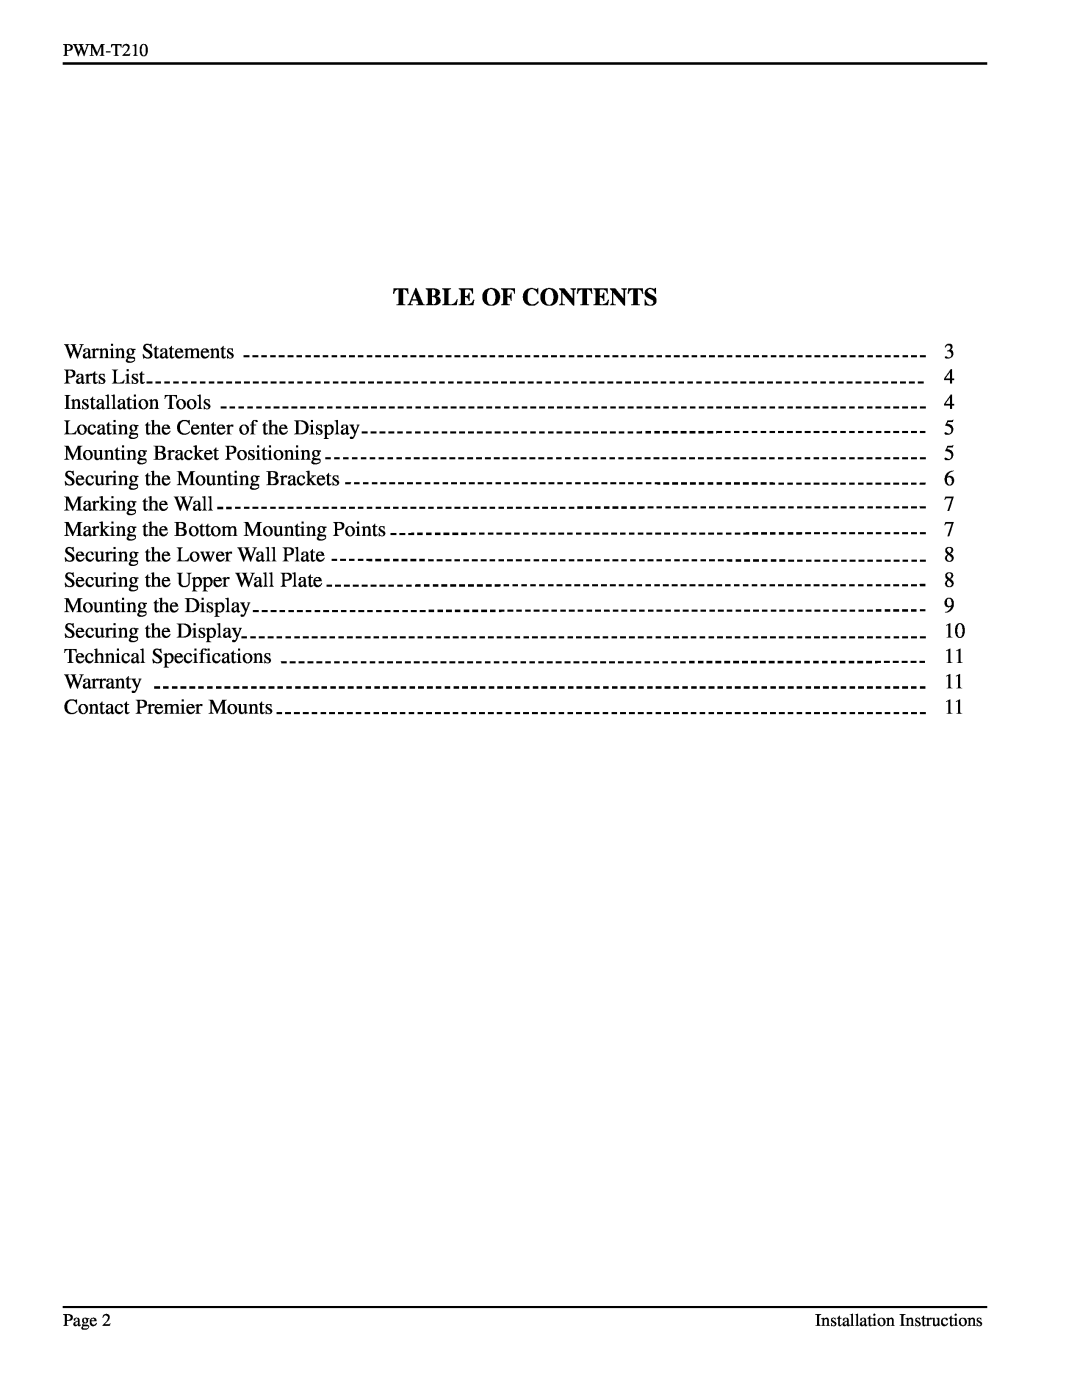 Pioneer PWM-T210 installation instructions Table Of Contents 